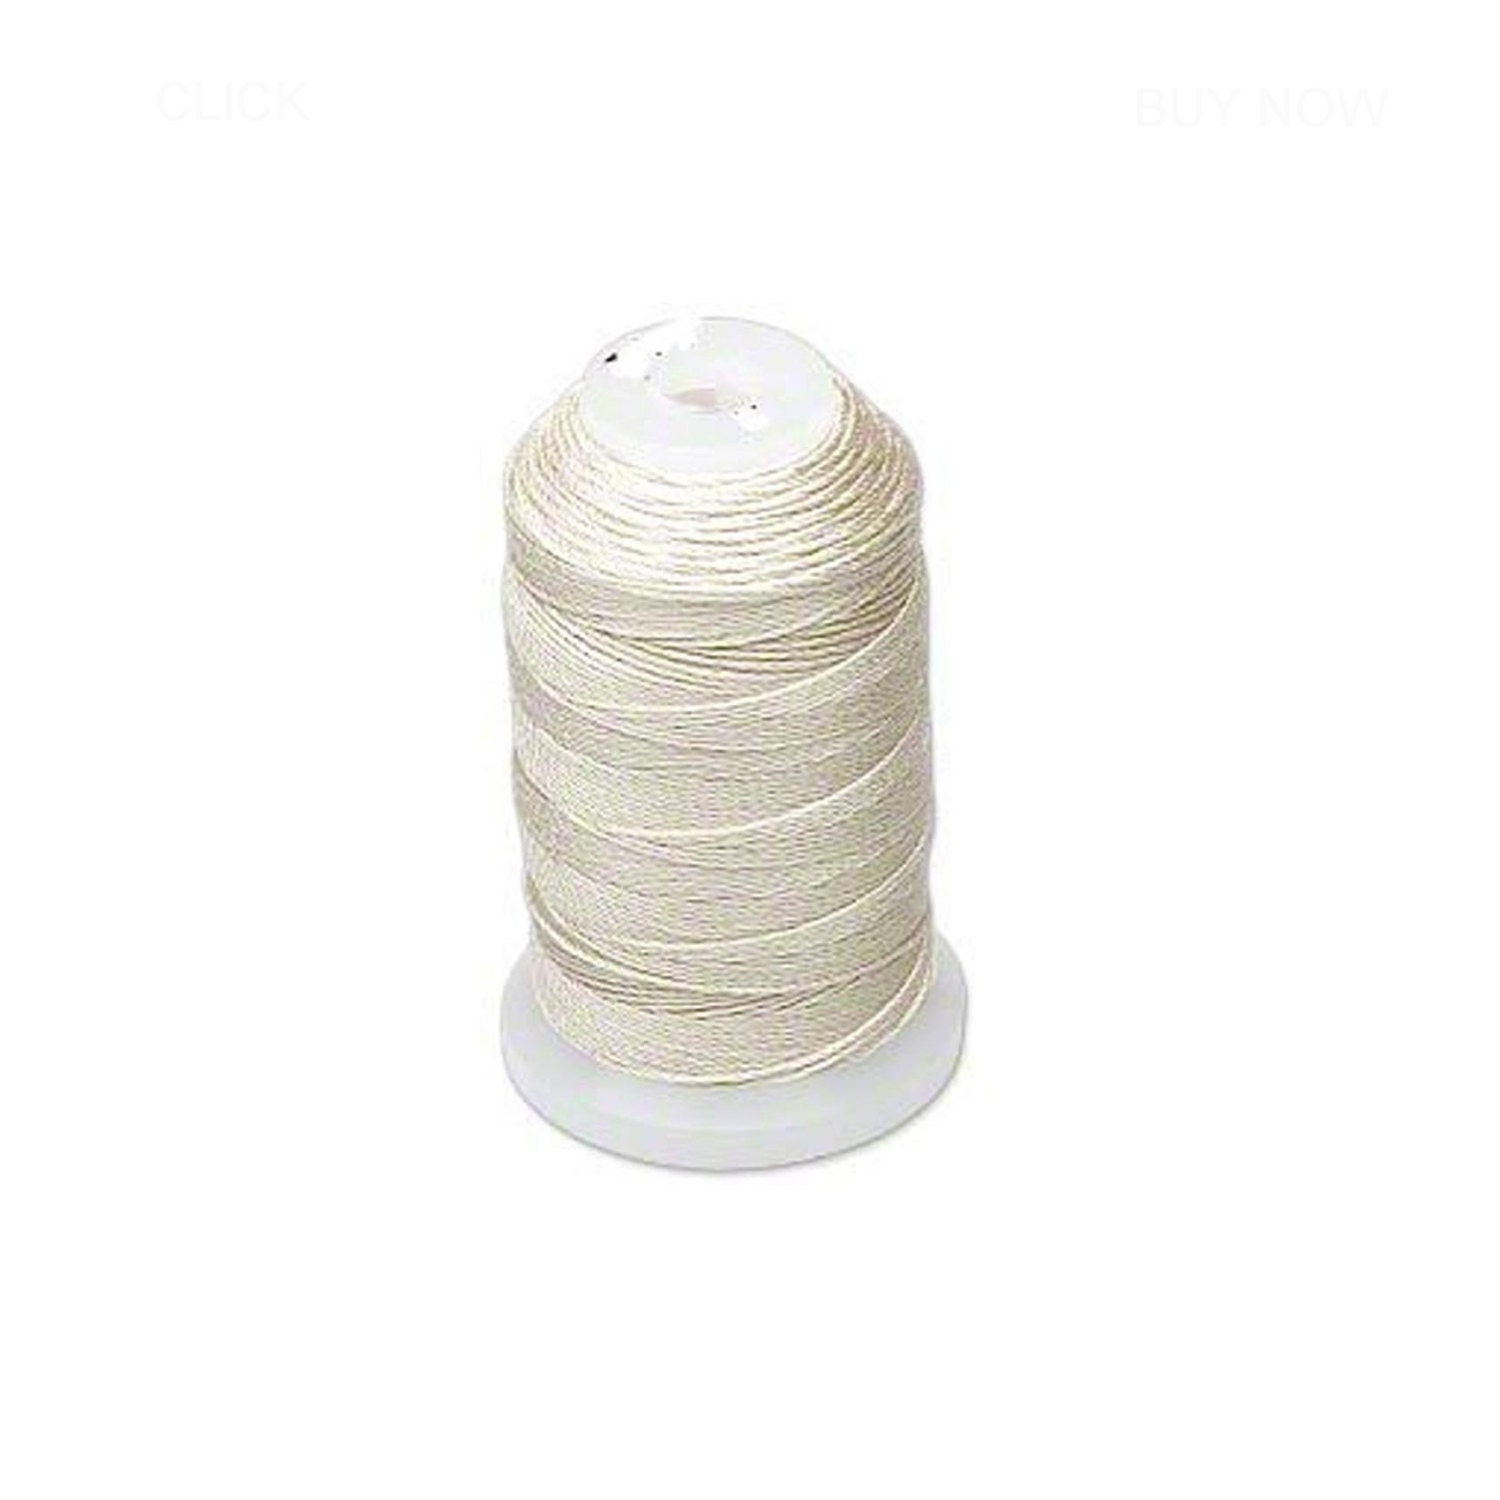 TEN 10 Packets Griffin Silk Cord (66 feet). Beading String With